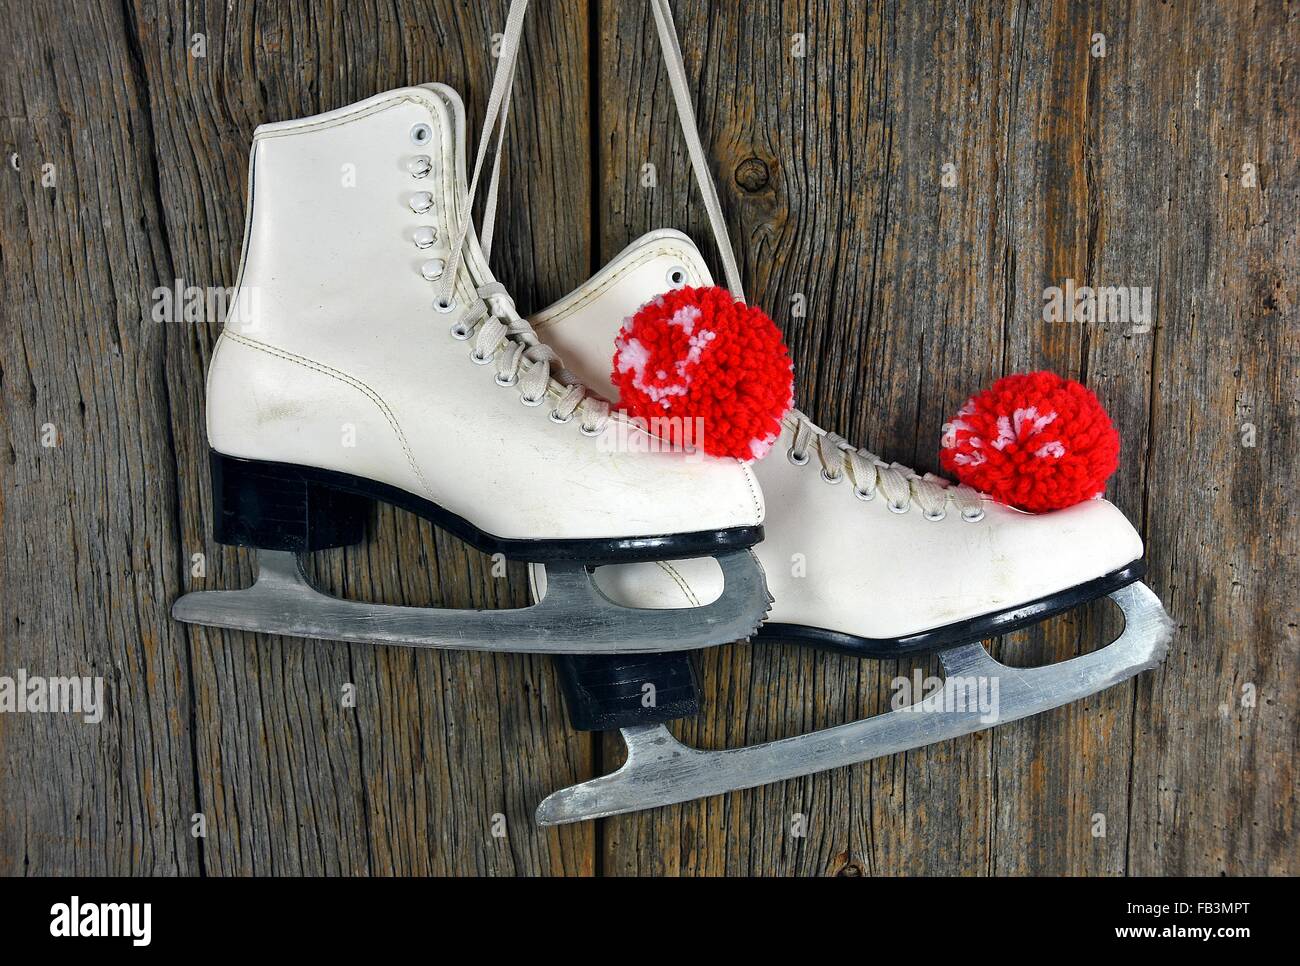 Pair of white ice skate with red yarn pompoms Stock Photo